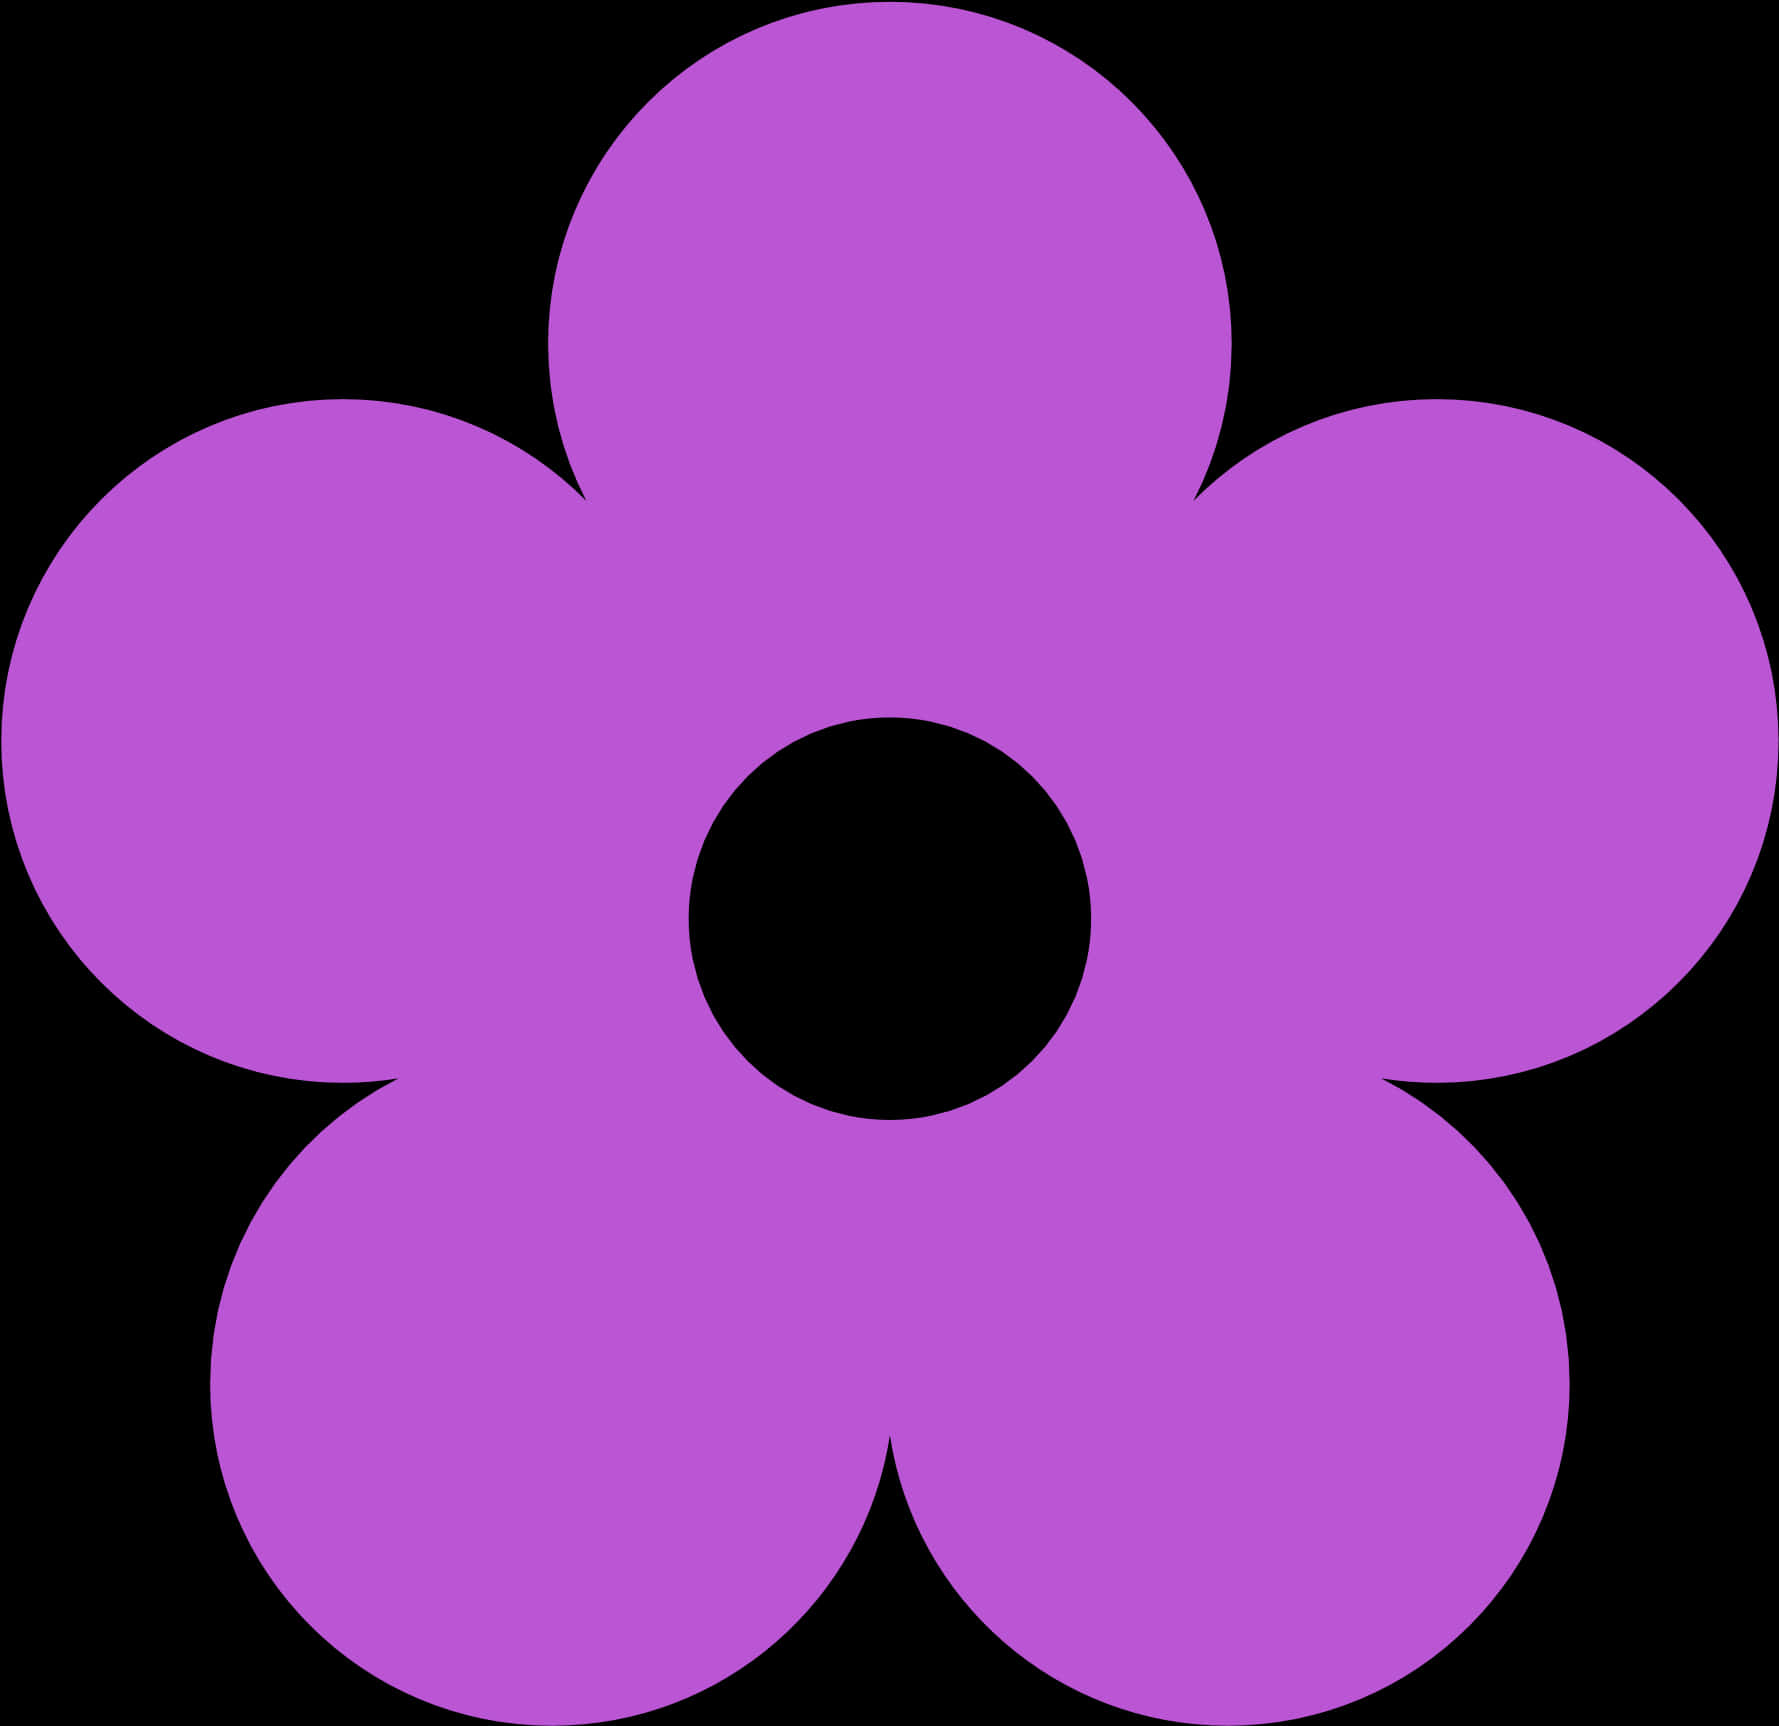 Purple Flower Graphic PNG